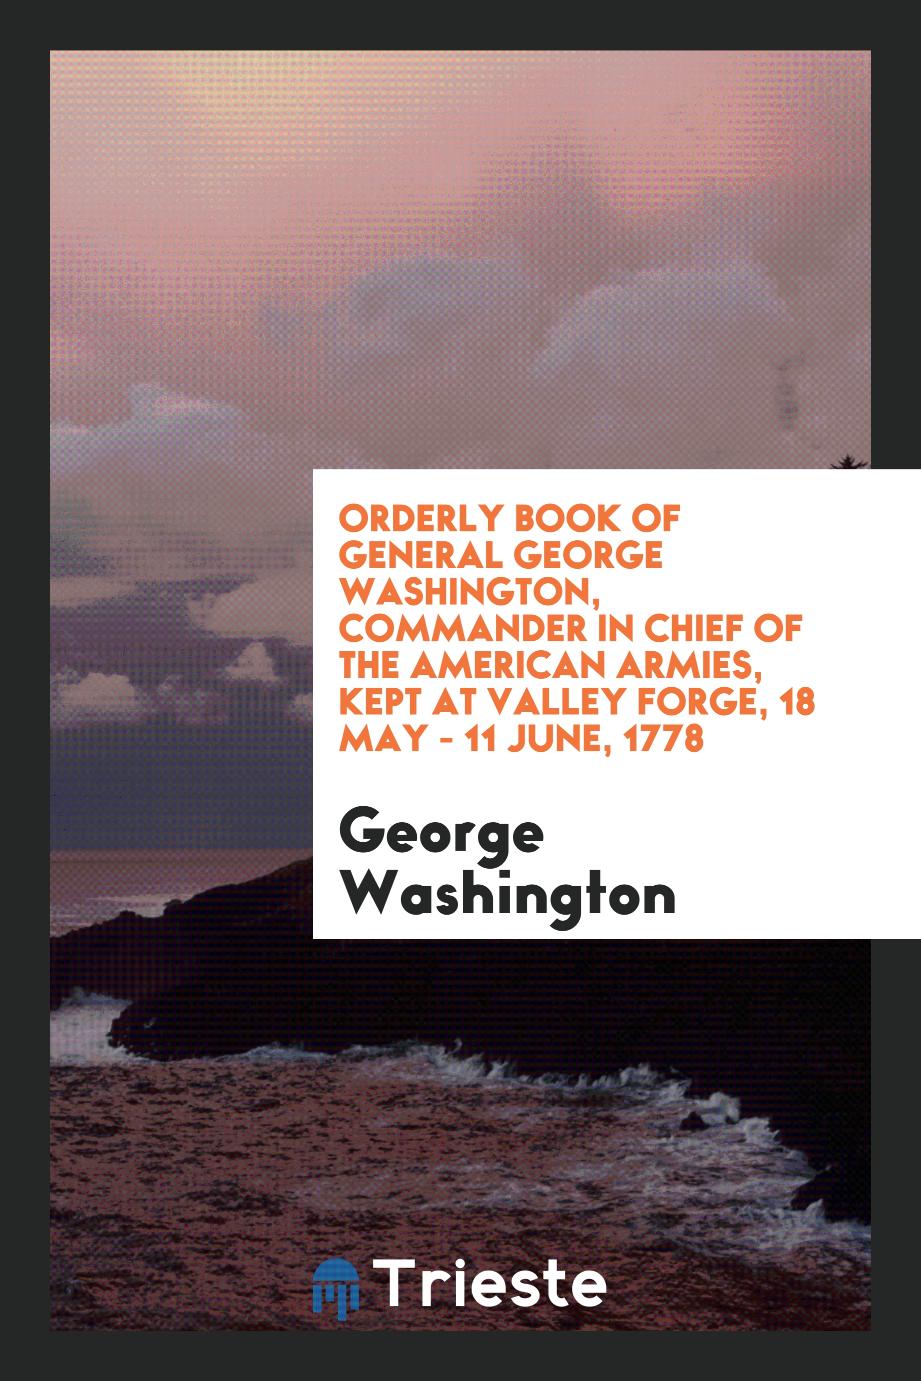 Orderly Book of General George Washington, Commander in Chief of the American Armies, Kept at Valley Forge, 18 May - 11 June, 1778